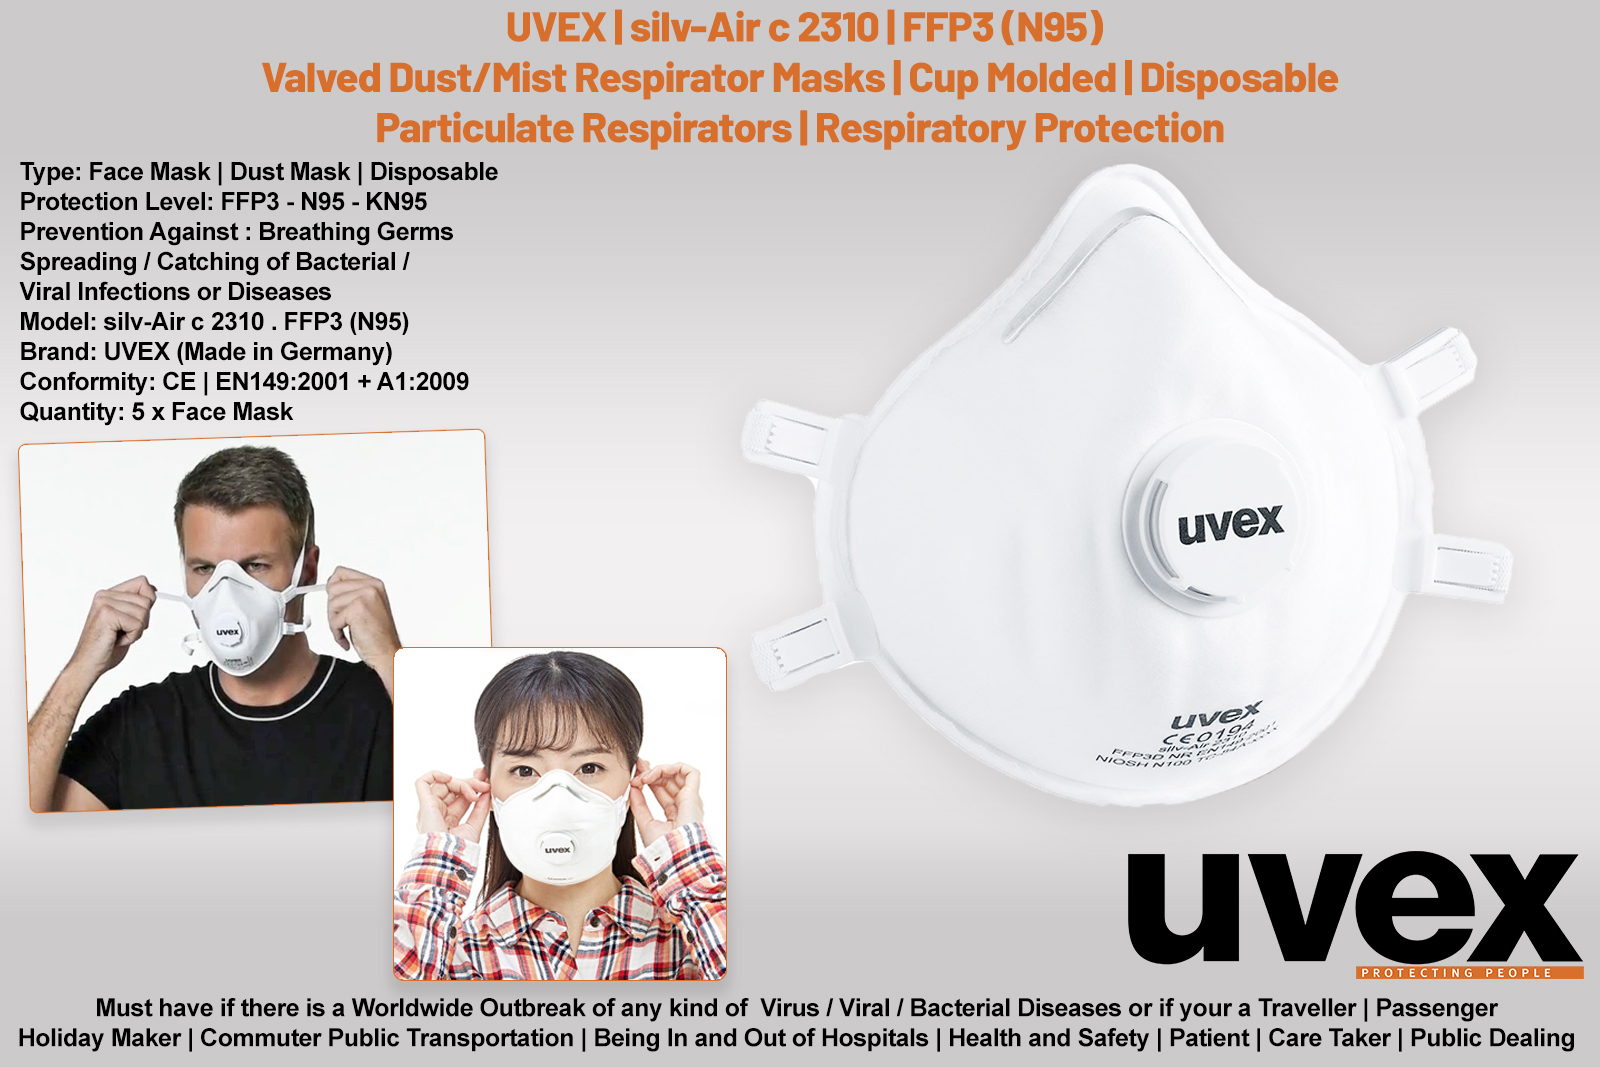 CORONA VIRUS COVID-19 Outbreak | Uvex Mask silv-Air c 2310 N99 > N95 FFP3 | GERMS Filter Dust Face Mask | Particulate Respirator | Qty 5 pc